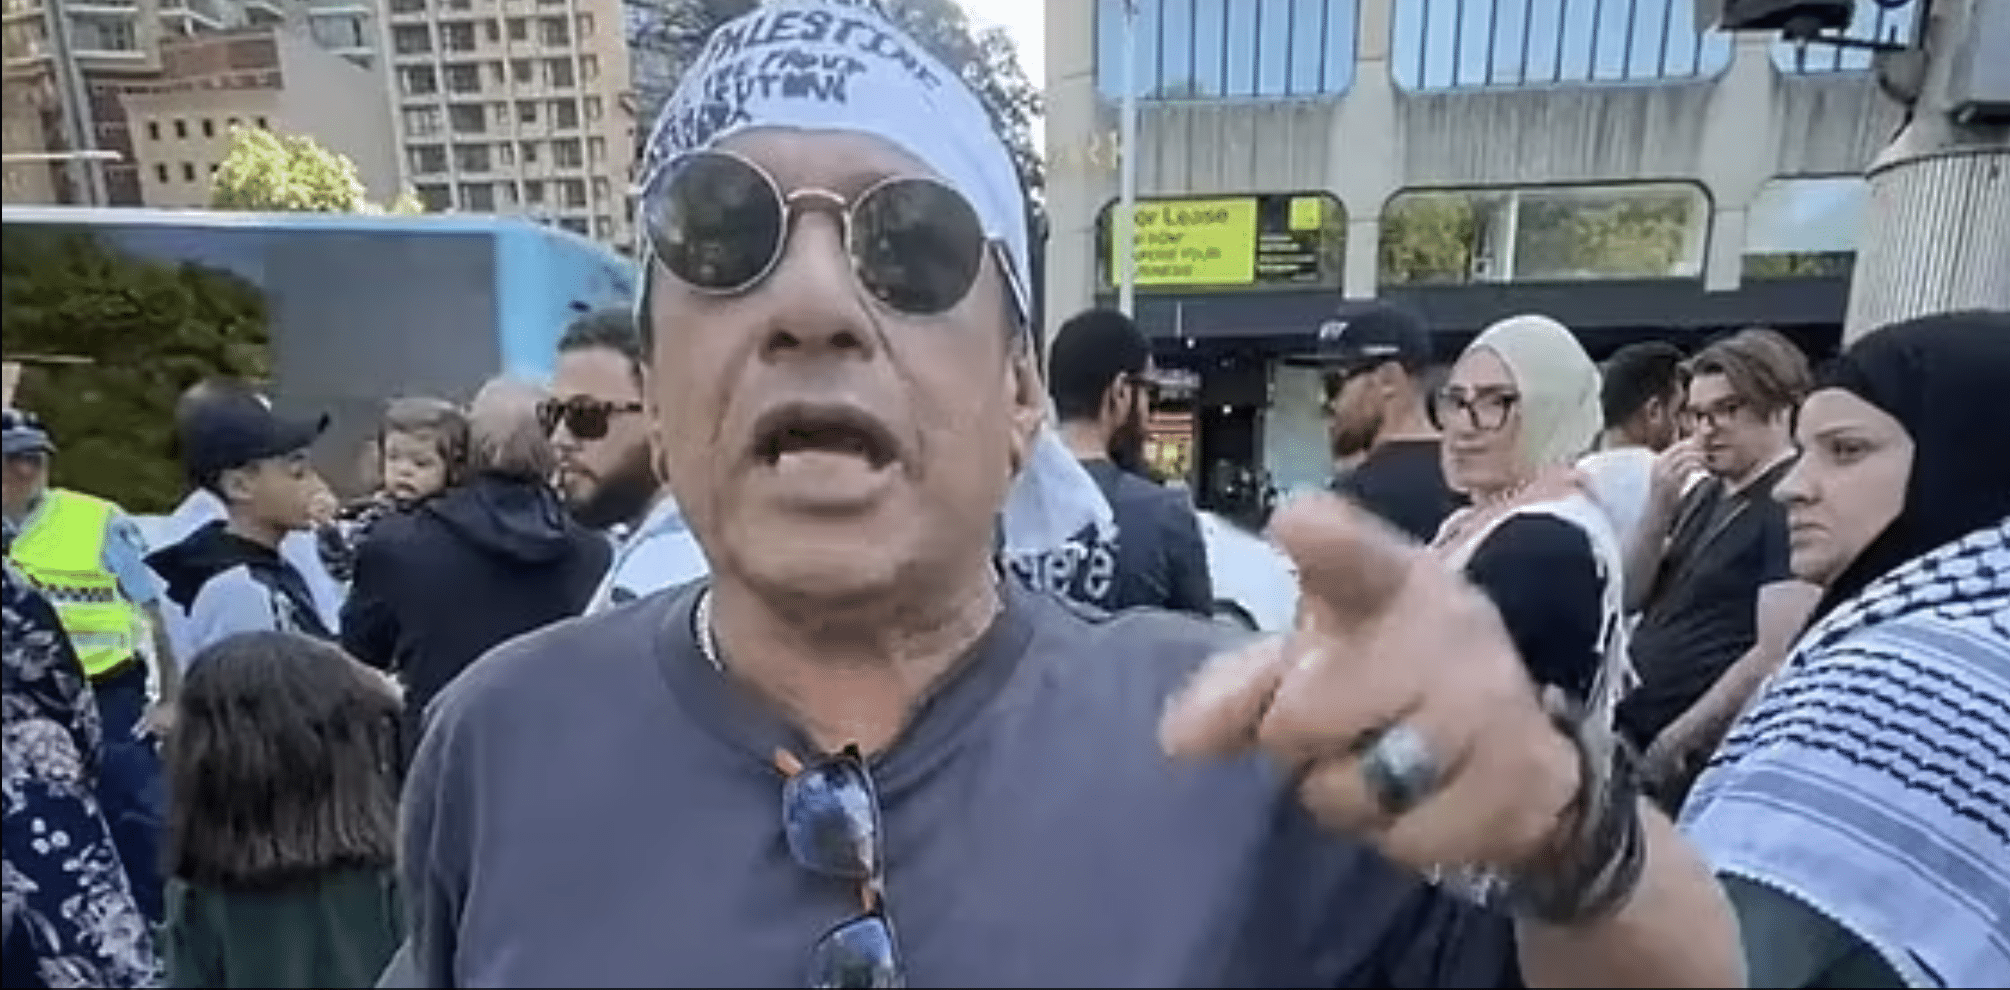 Pro-Palestine protester calls for Jews to be ‘wiped out’ as Australian protests turn ugly